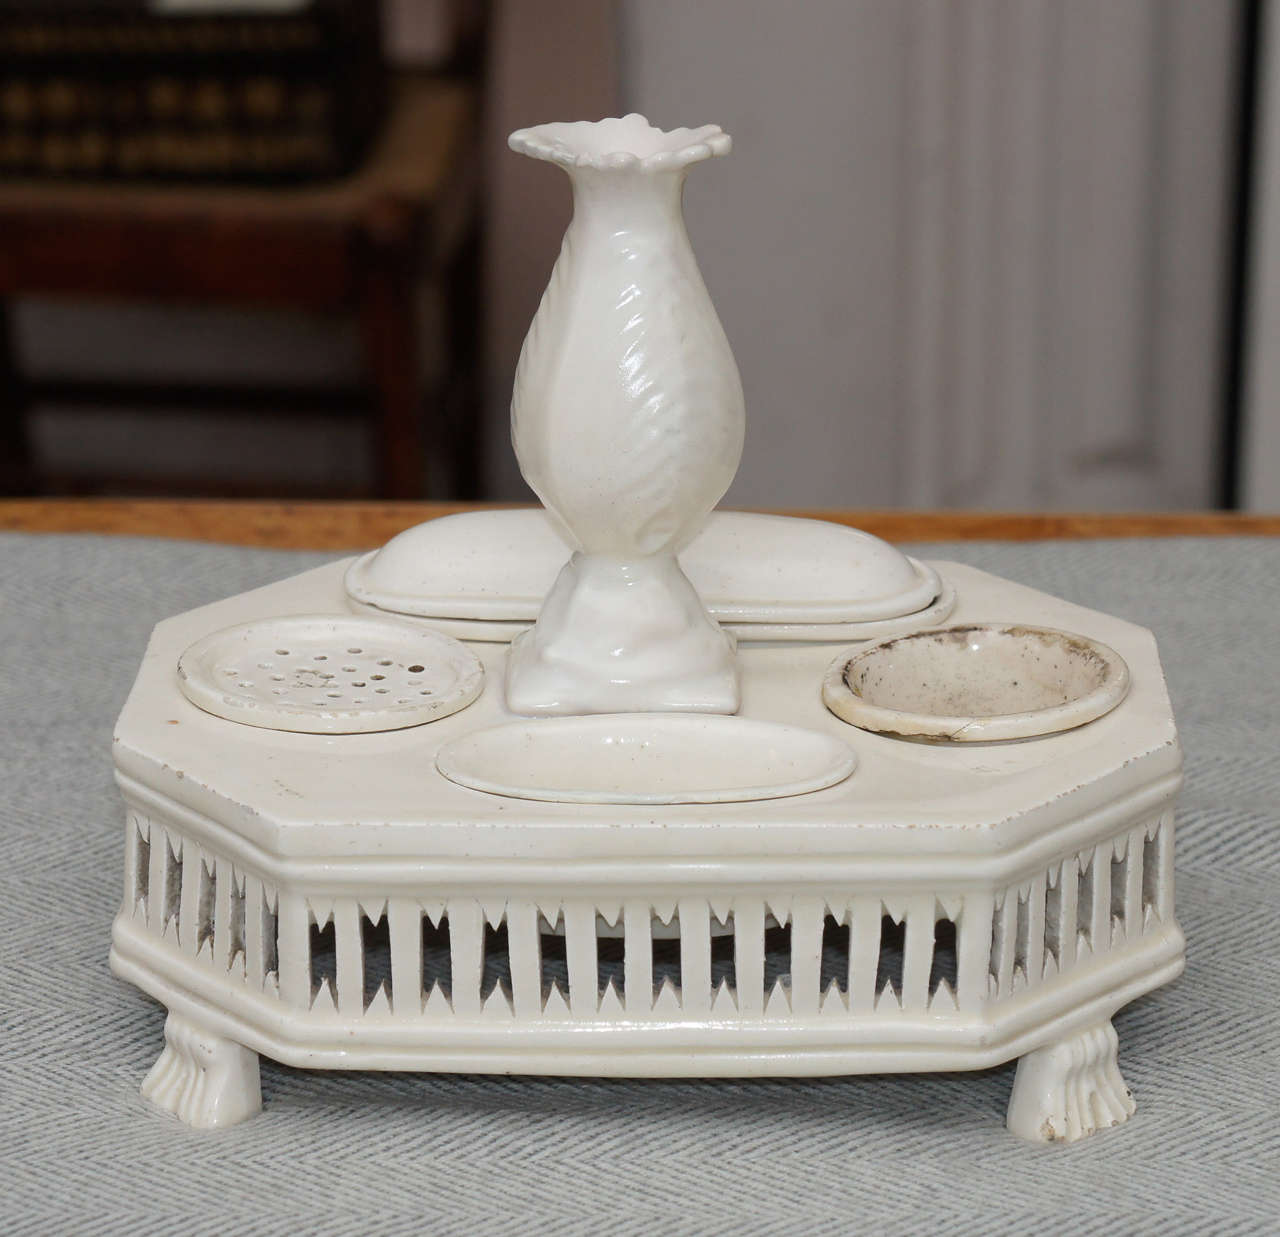 English creamware inkwell. Probably Wedgwood. Pierced base supported
by feet. Bud vase, inkwell, sander and pin dish with lid.